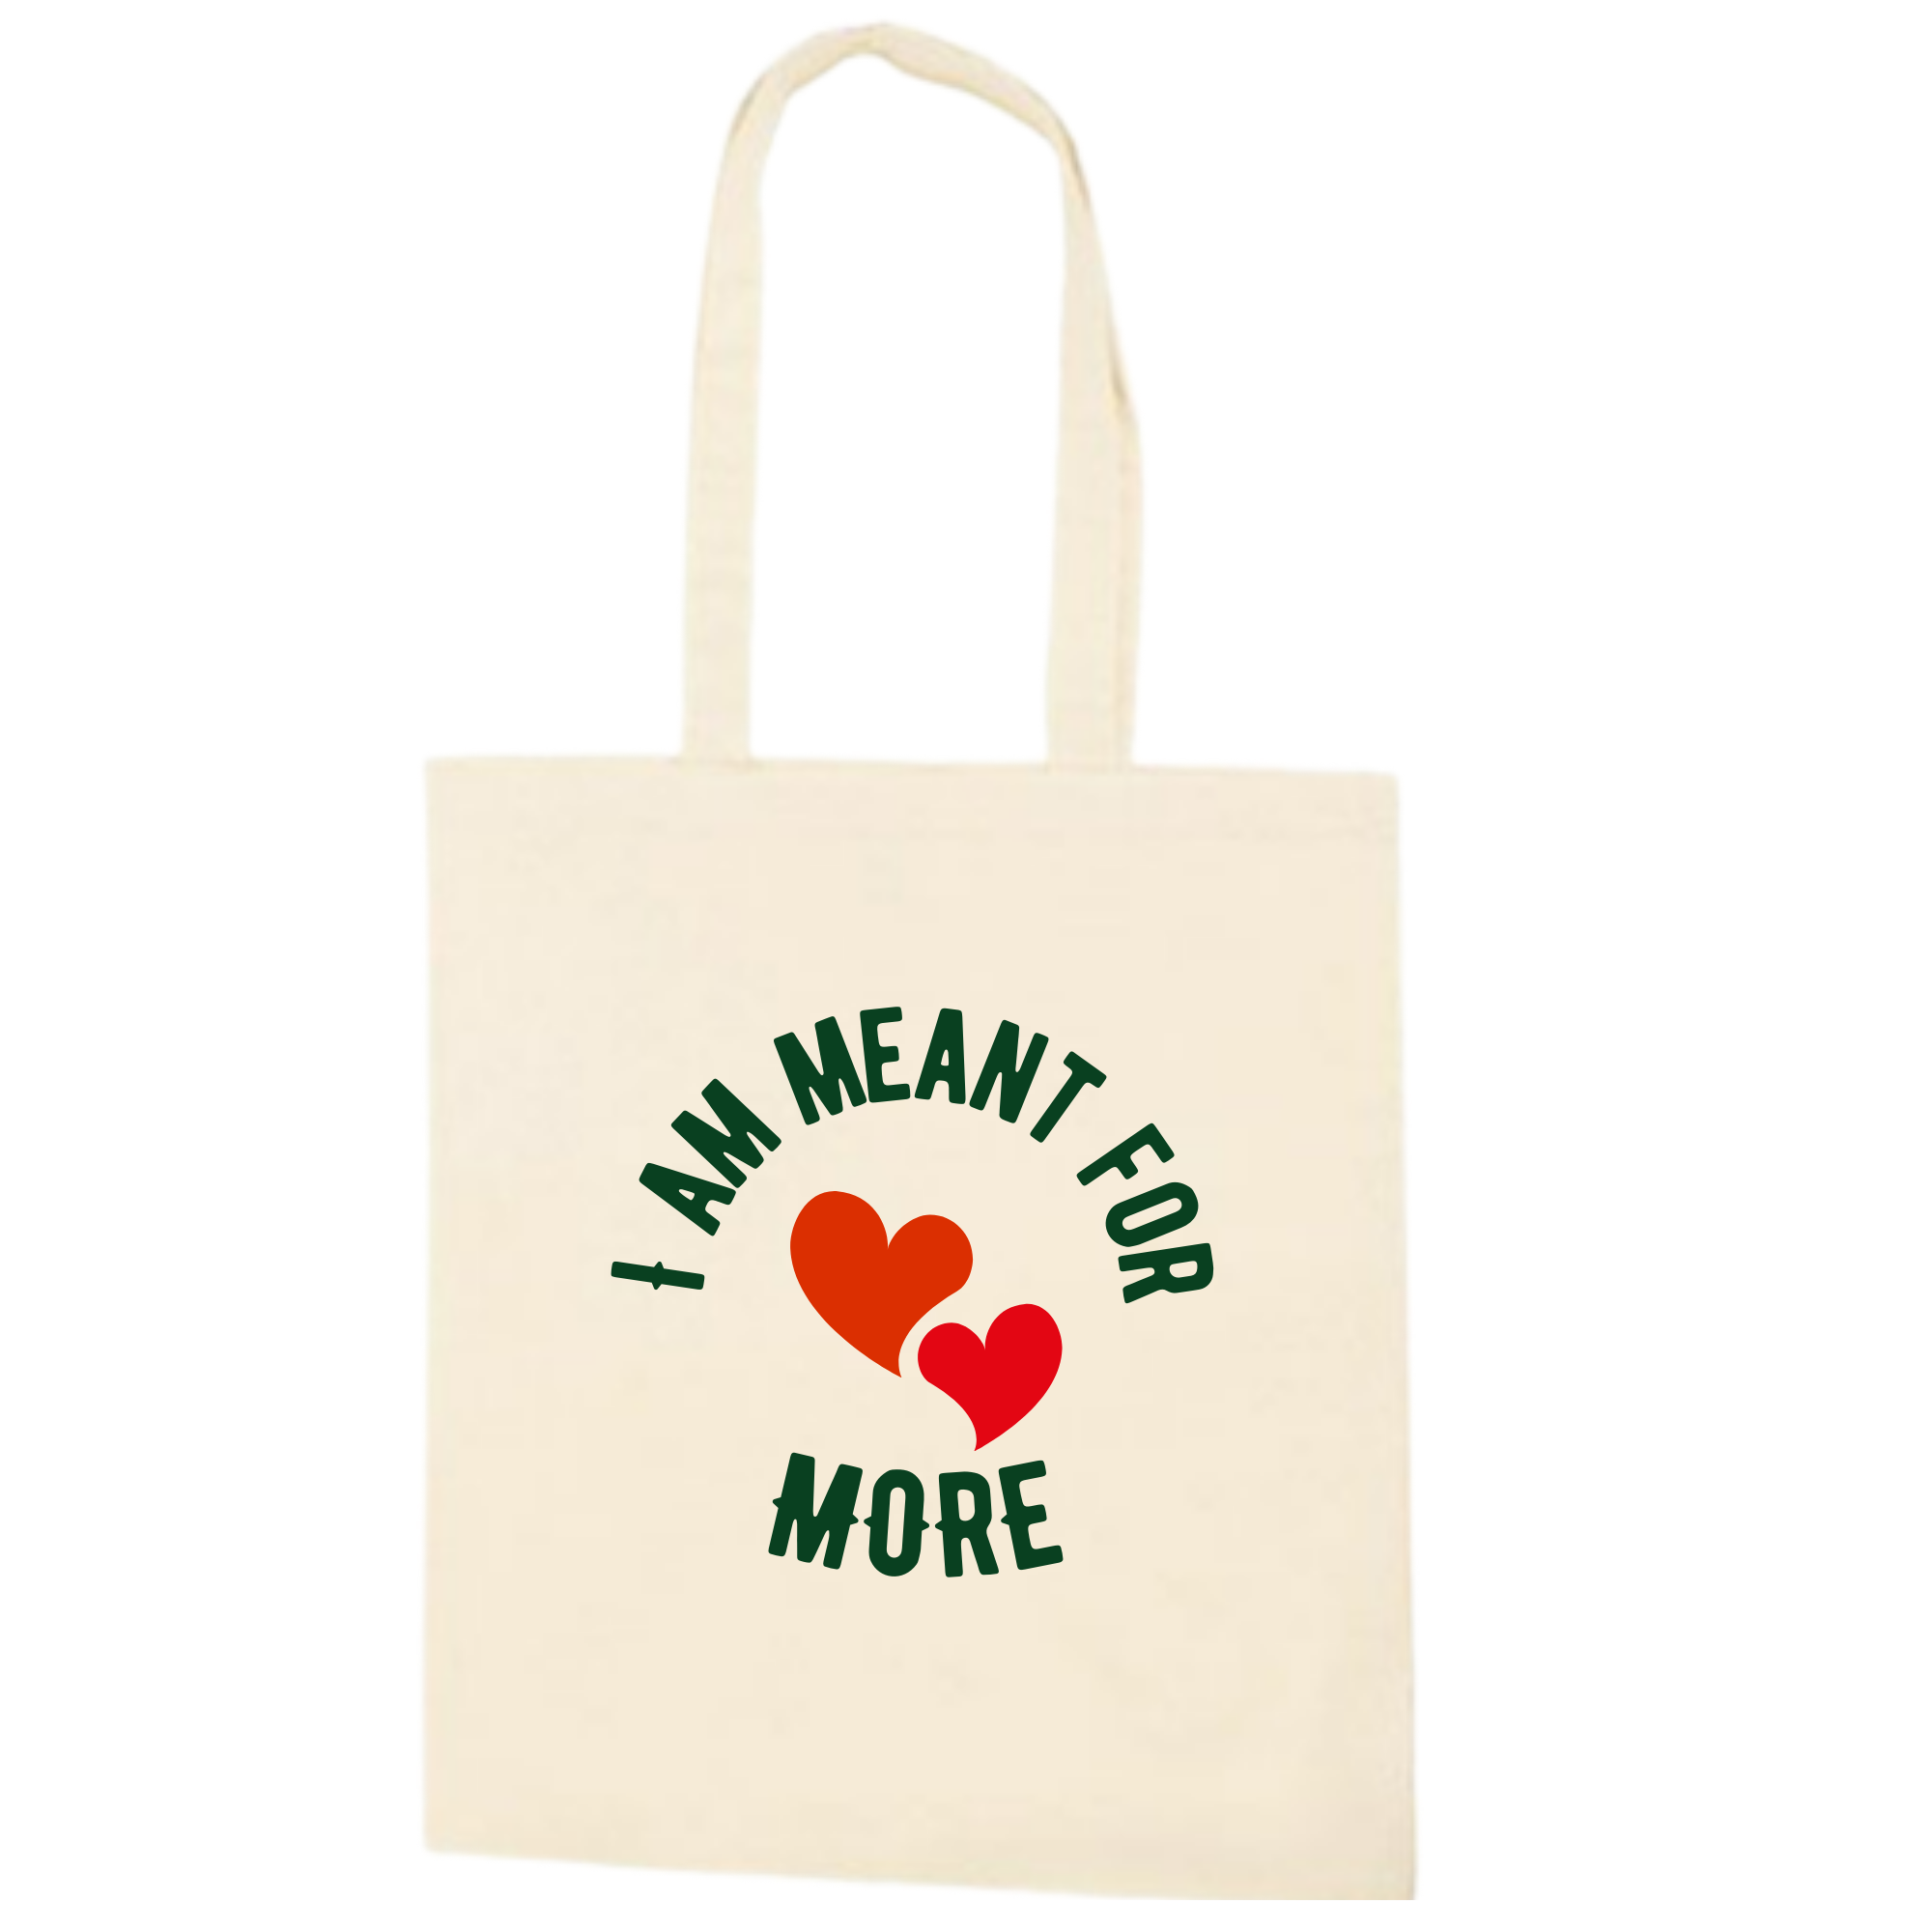 "I am Meant for More" Tote Bags - Canvas